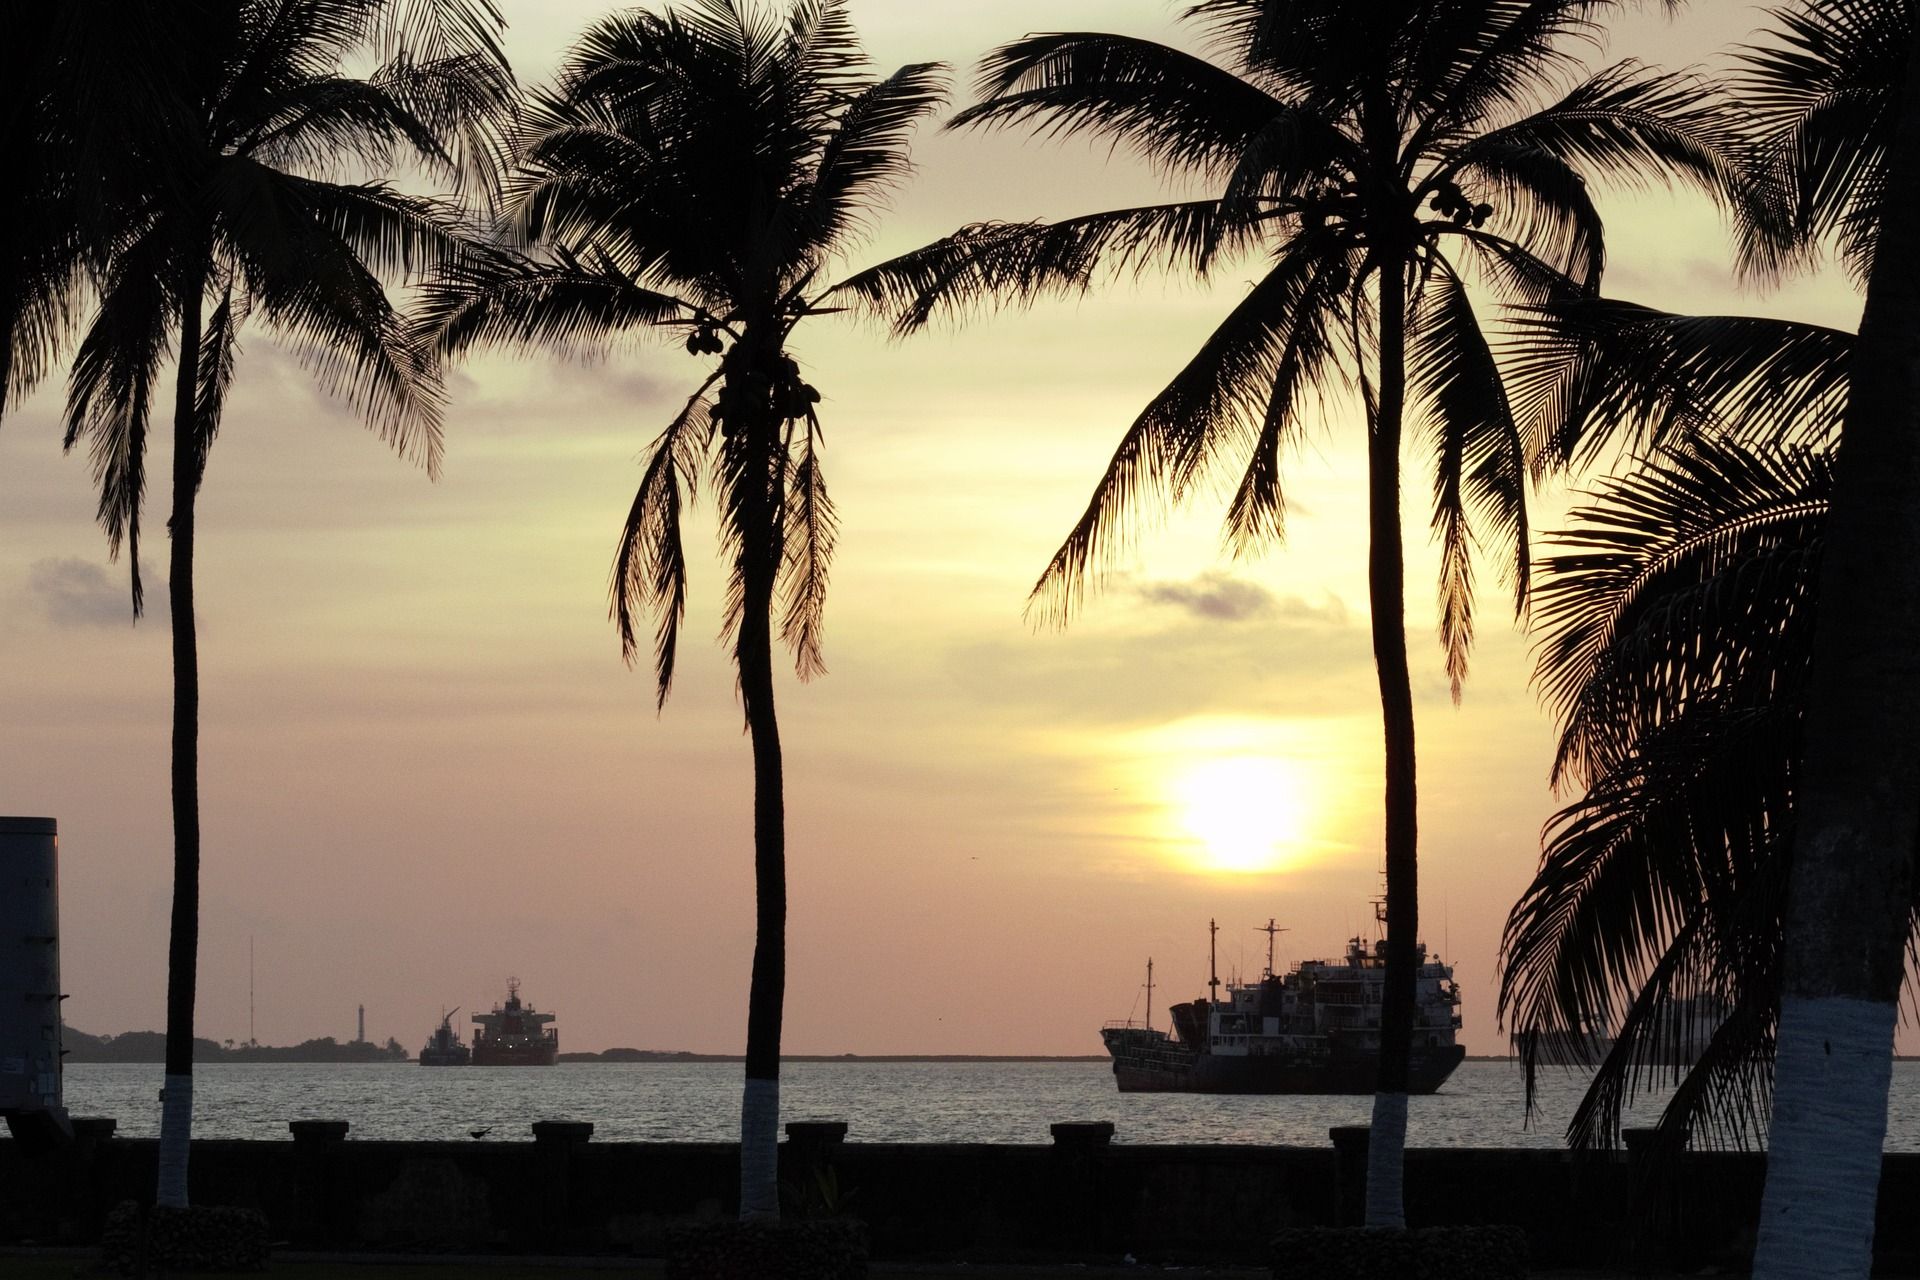 Silhouette of palm trees with a boat in the water at sunset in the background